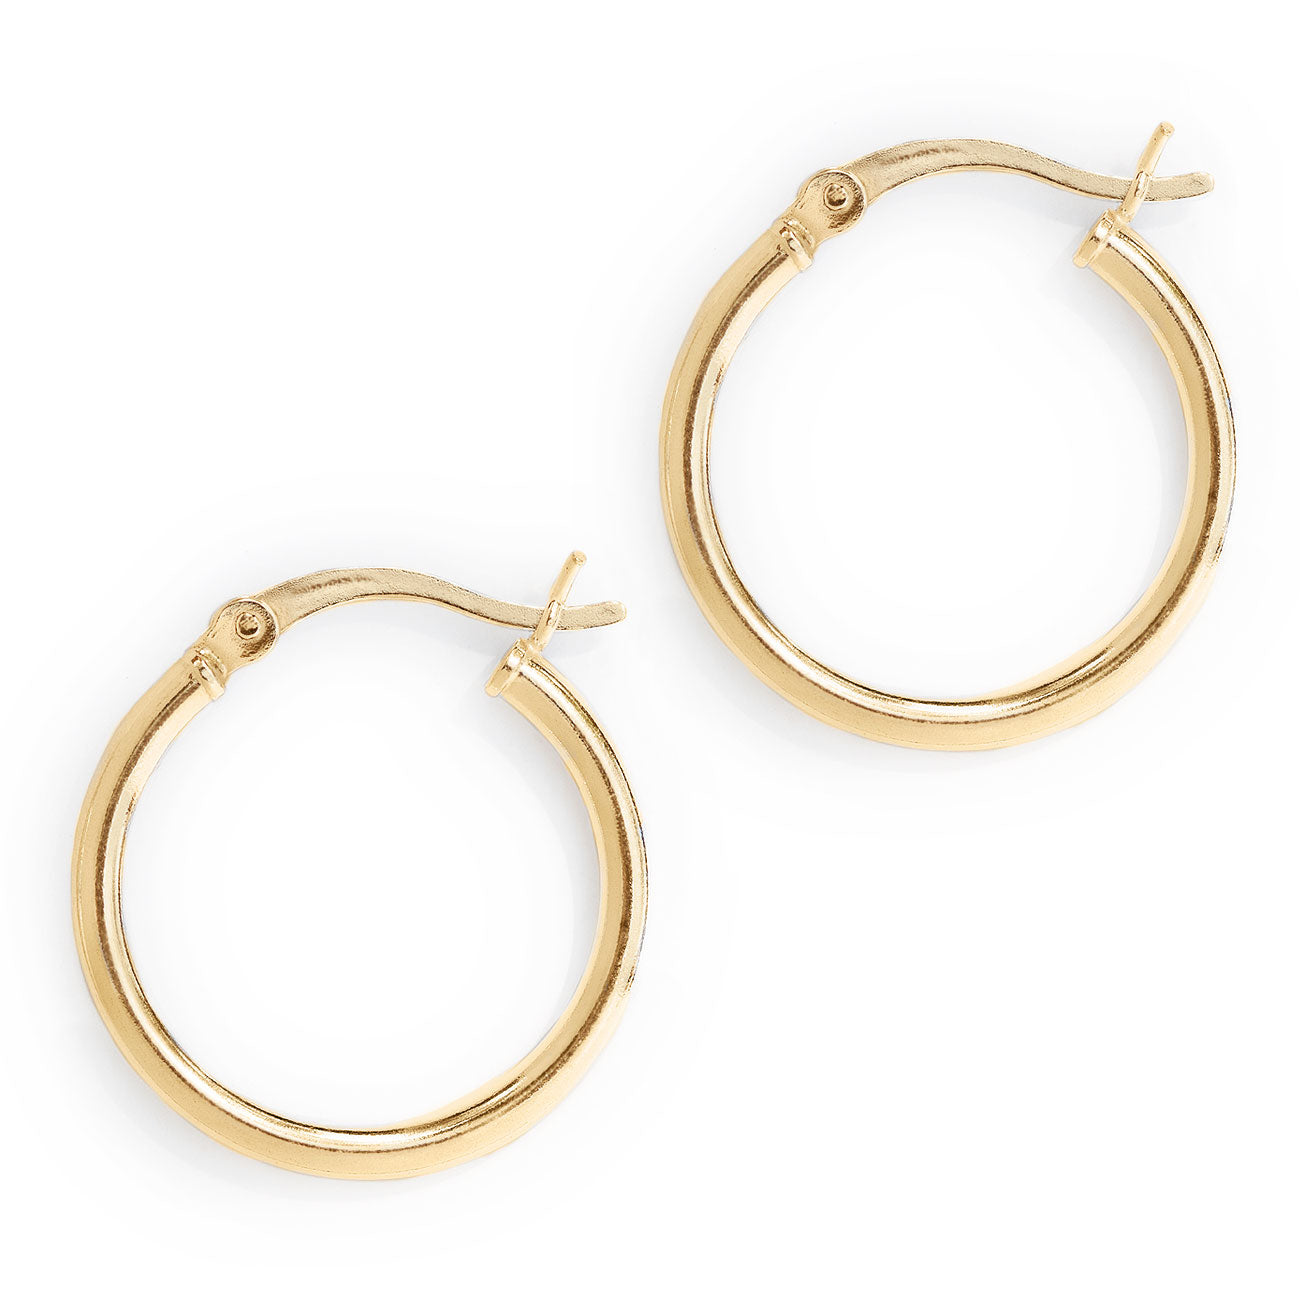 Gold Small Hoop Earrings with Latch